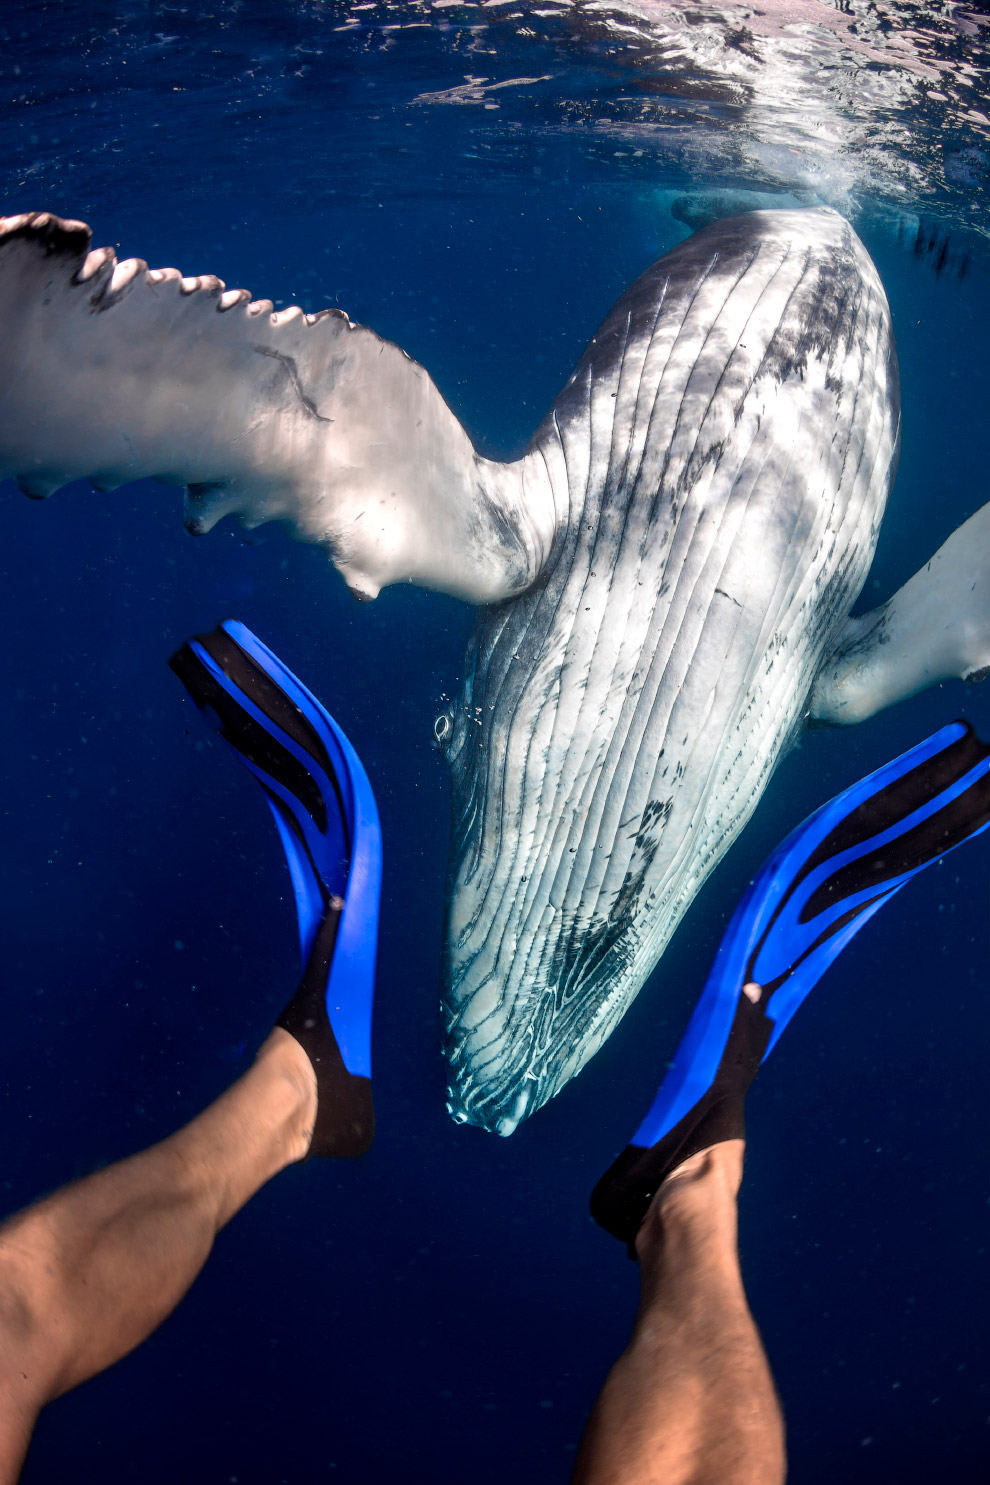 PHOTOS: Swimming with whales